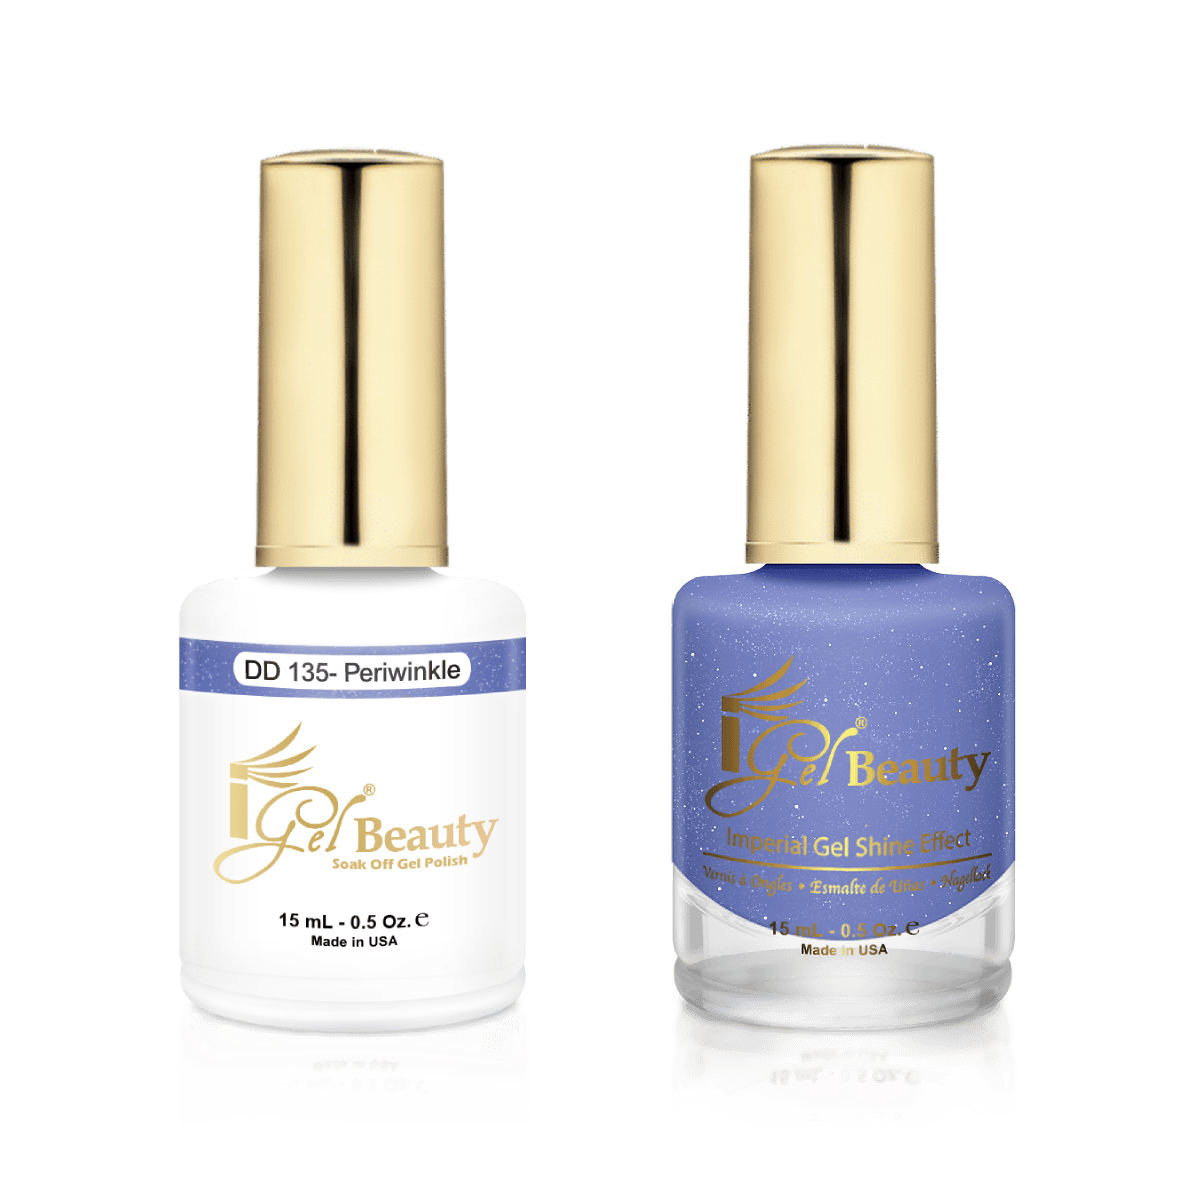 IGel Duo Gel Polish + Matching Nail Lacquer DD 135 PERIWINKLE